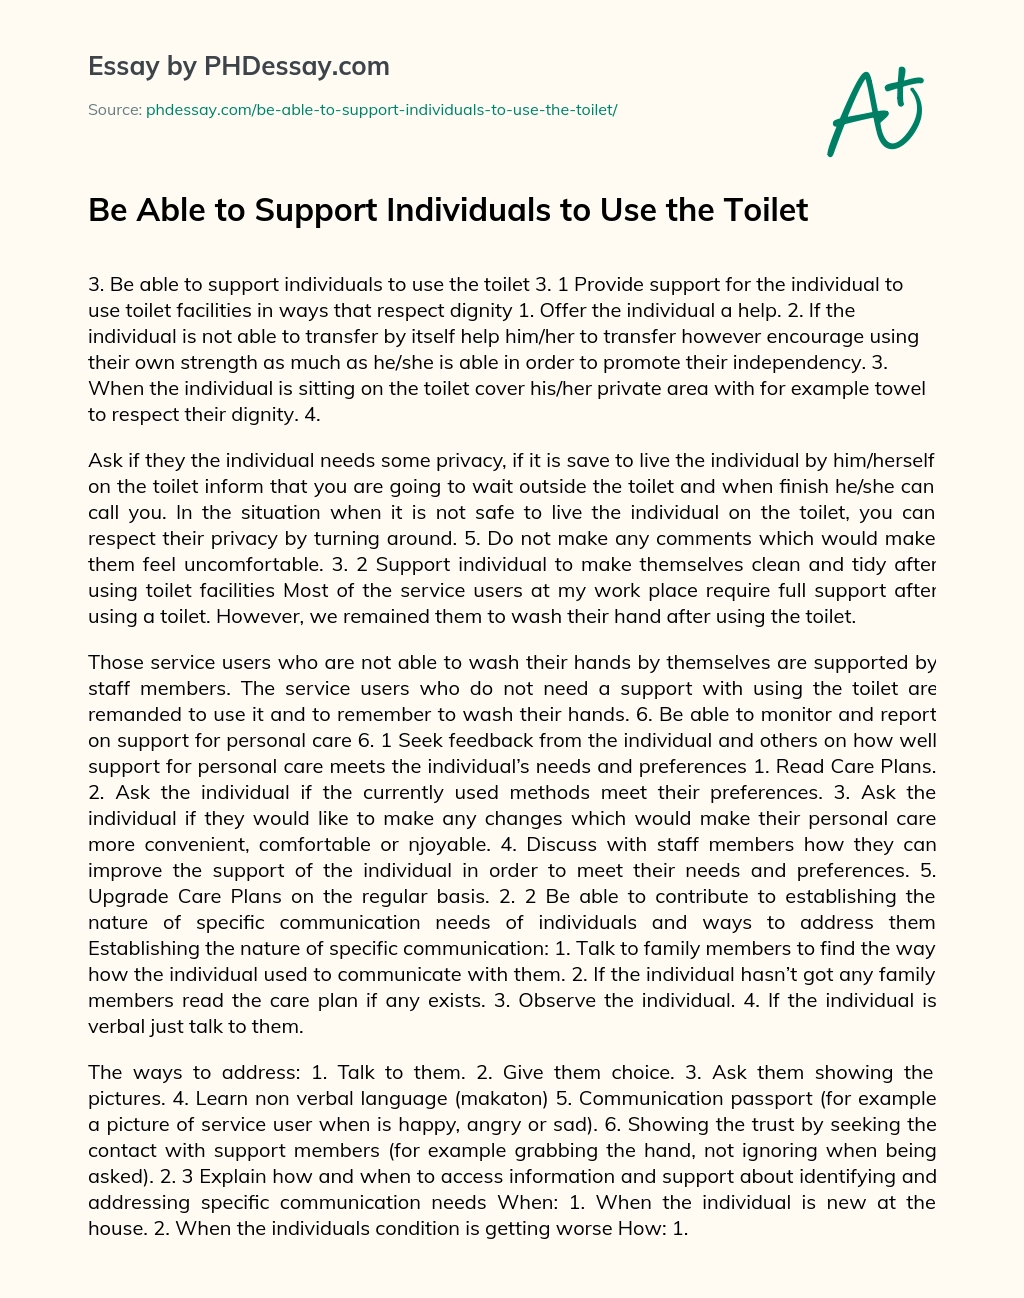 Be Able to Support Individuals to Use the Toilet essay